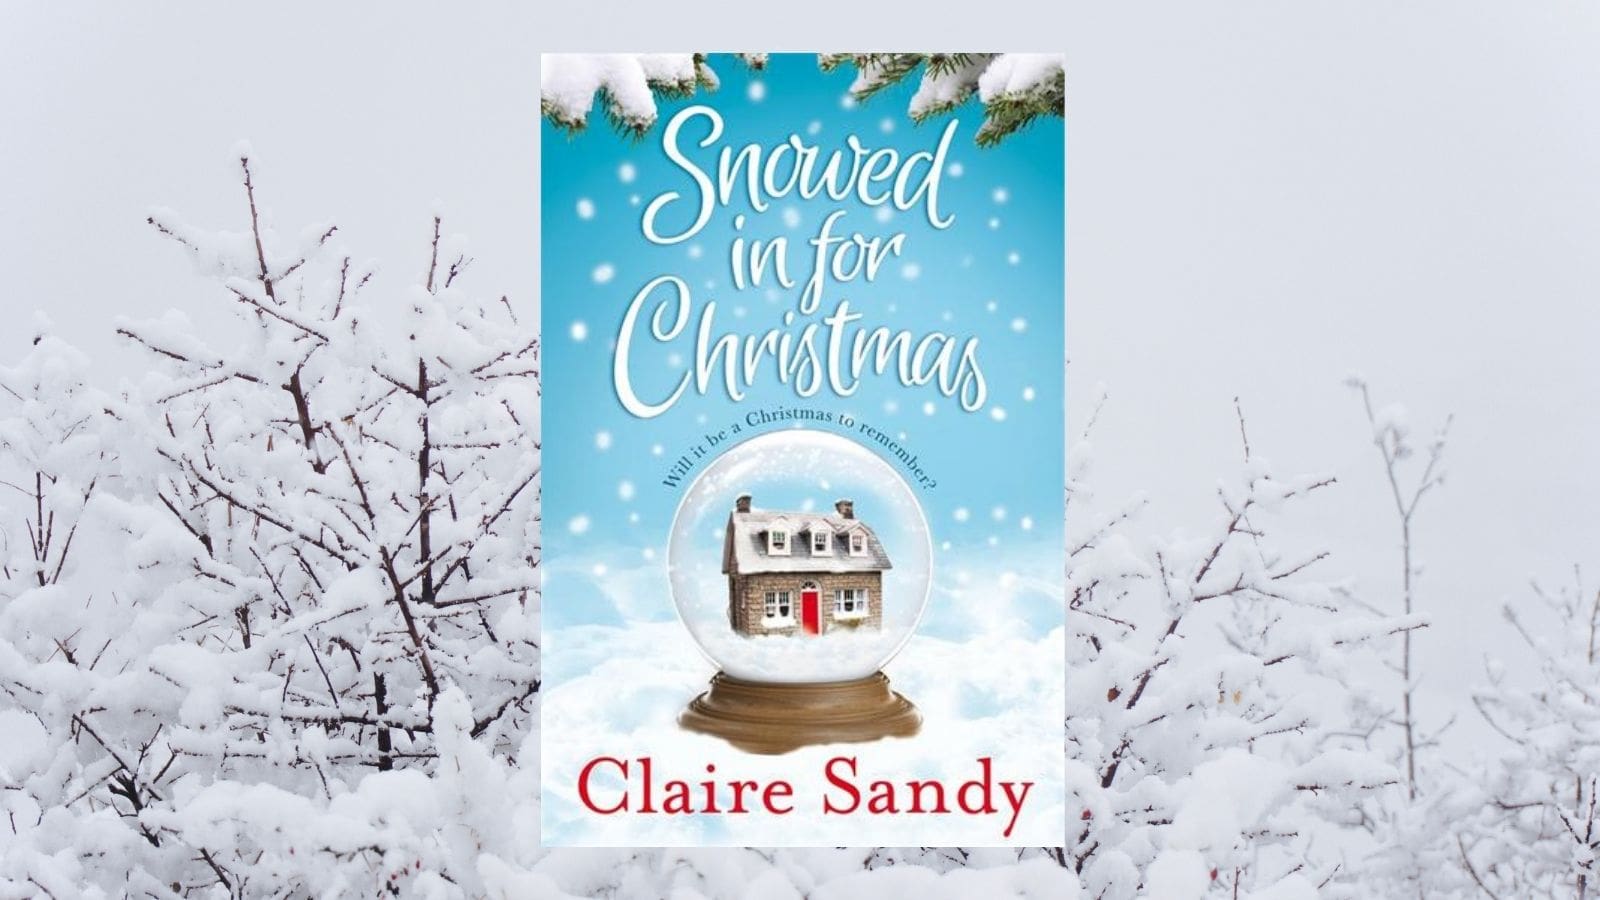 Book cover for Snowed in for Christmas by Claire Sandy on a background of snowy branches